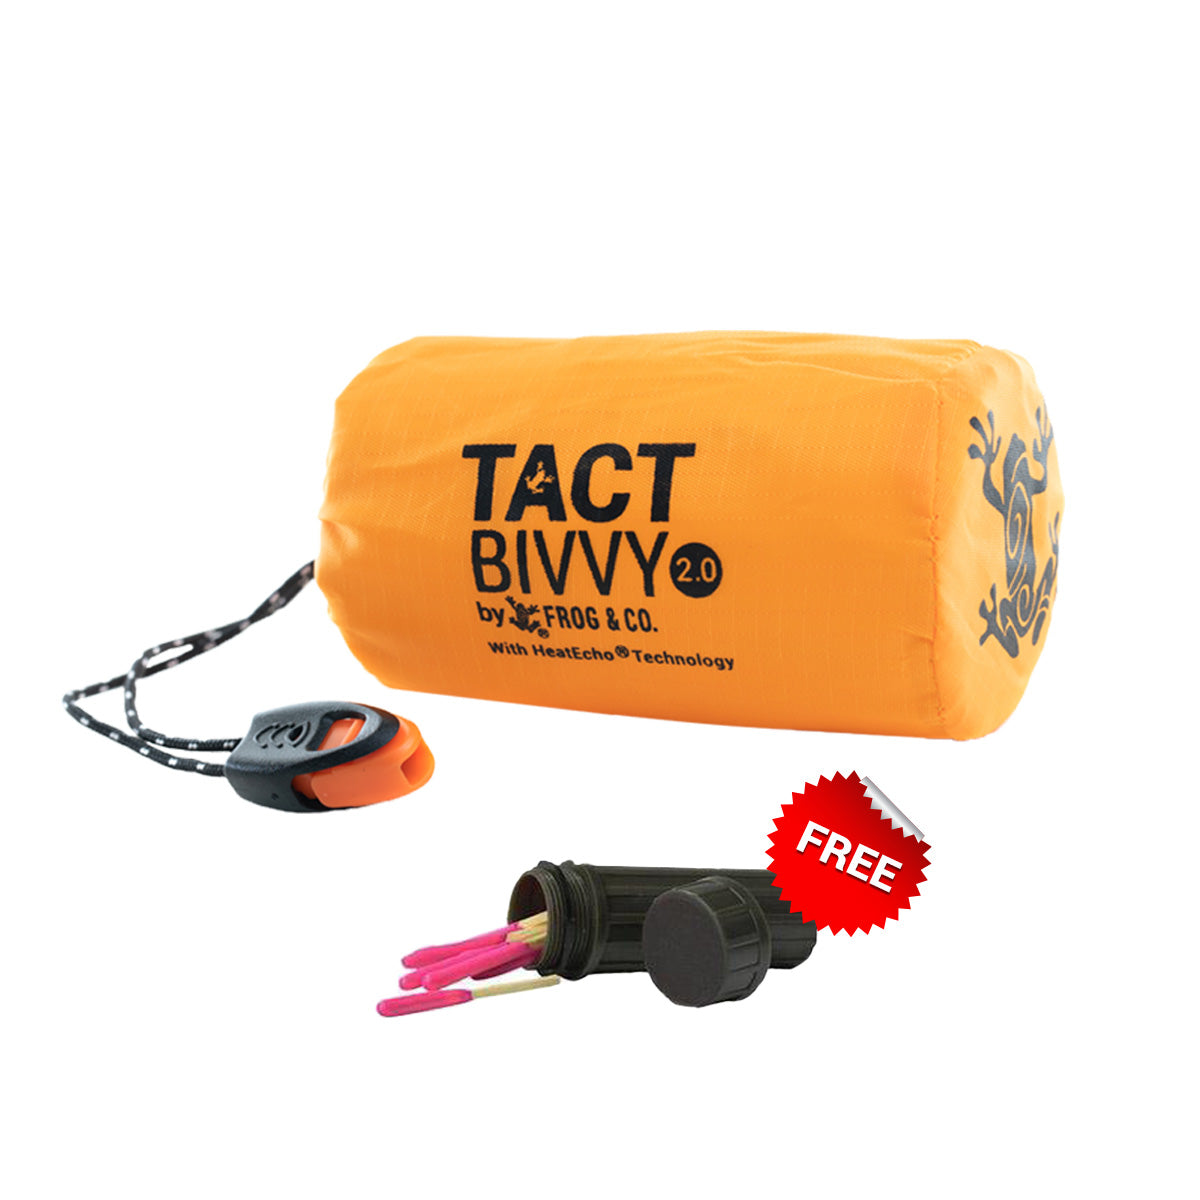 ZIPIFY 1 TACT BIVVY EMERGENCY SLEEPING BAG + 1 FREE PACK OF MATCHES